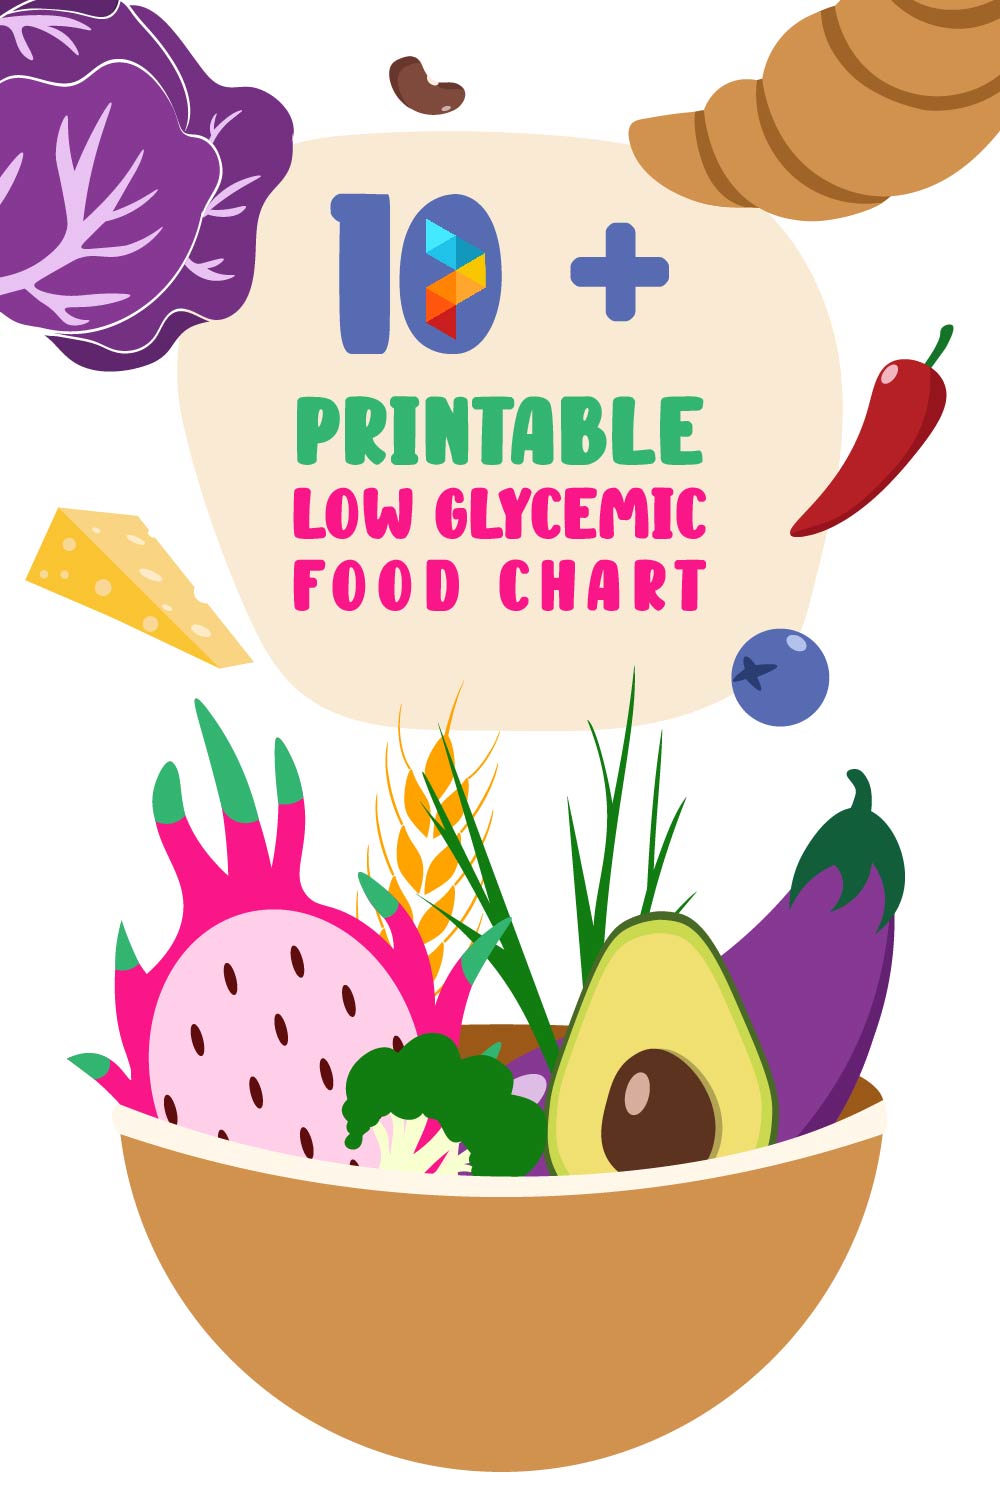 Printable Low Glycemic Food Chart